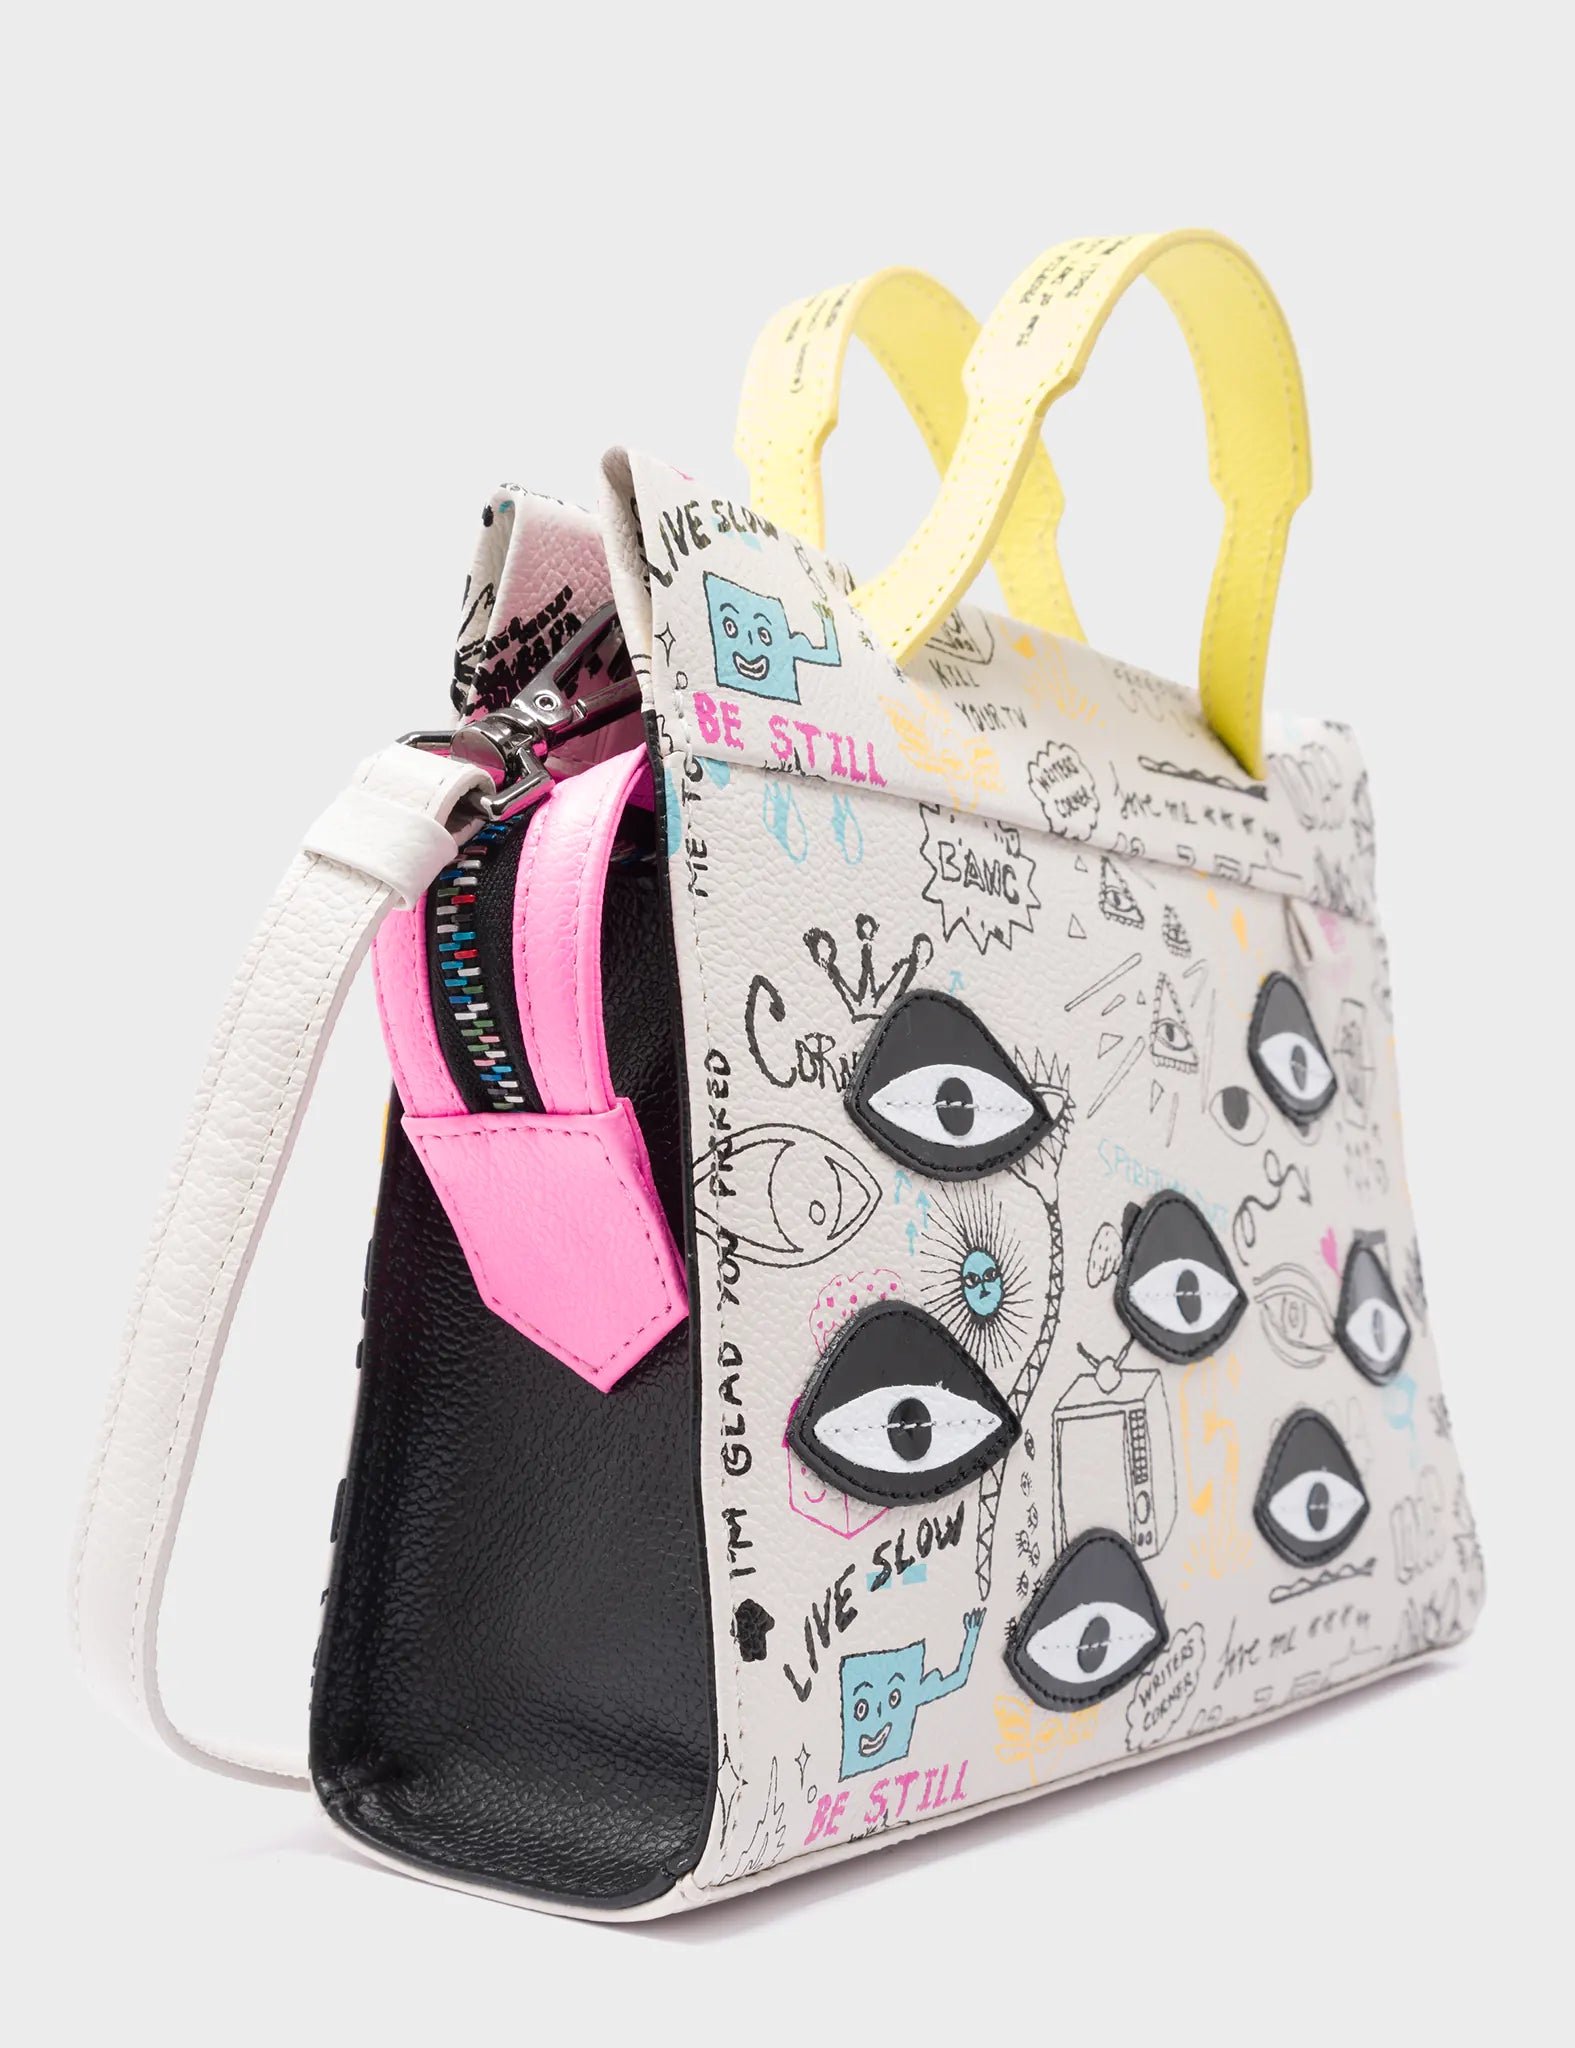 Vali Crossbody Small Cream Leather Bag - Urban Doodles Print and Eyes Applique - Detail view